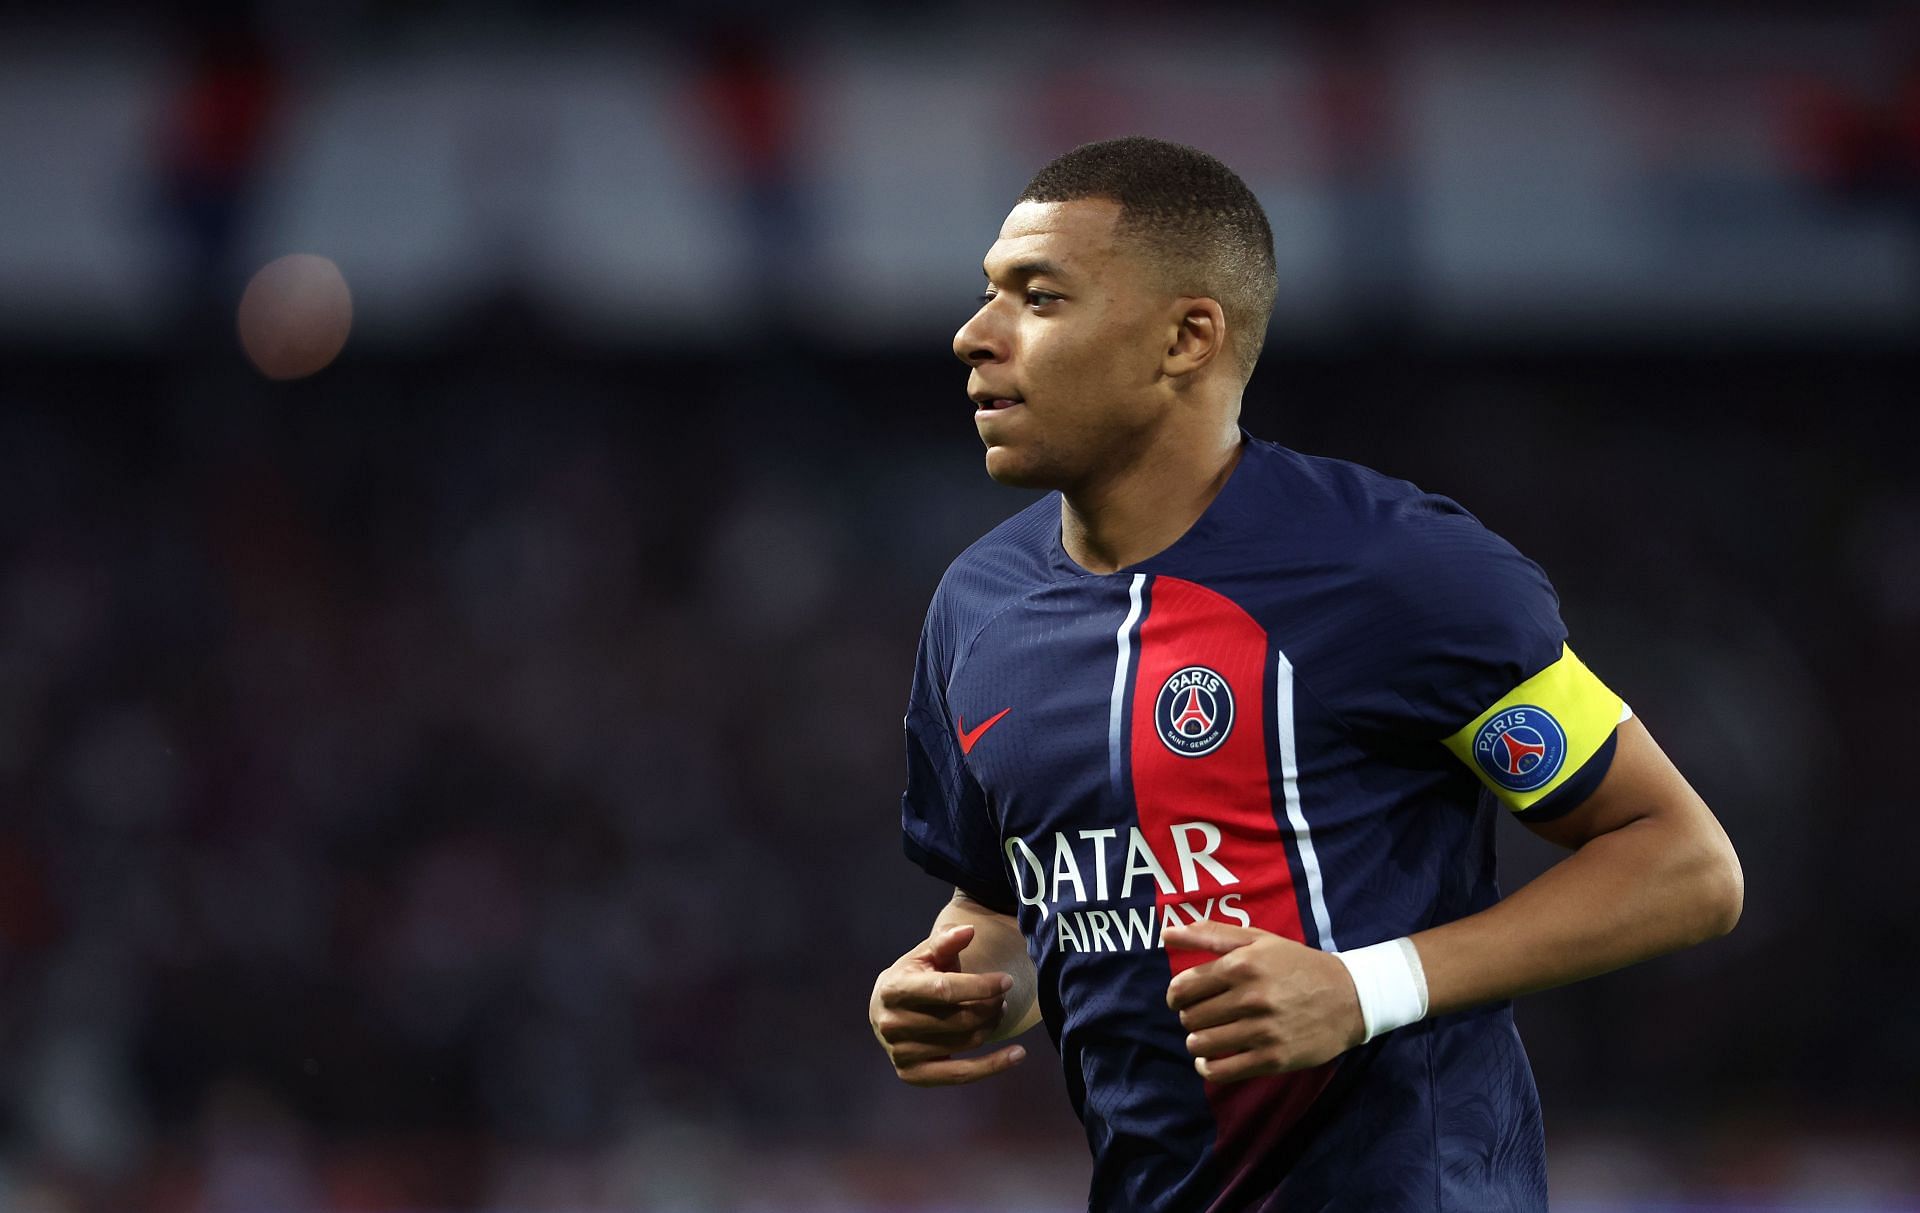 Kylian Mbappe has admirers at the Camp Nou